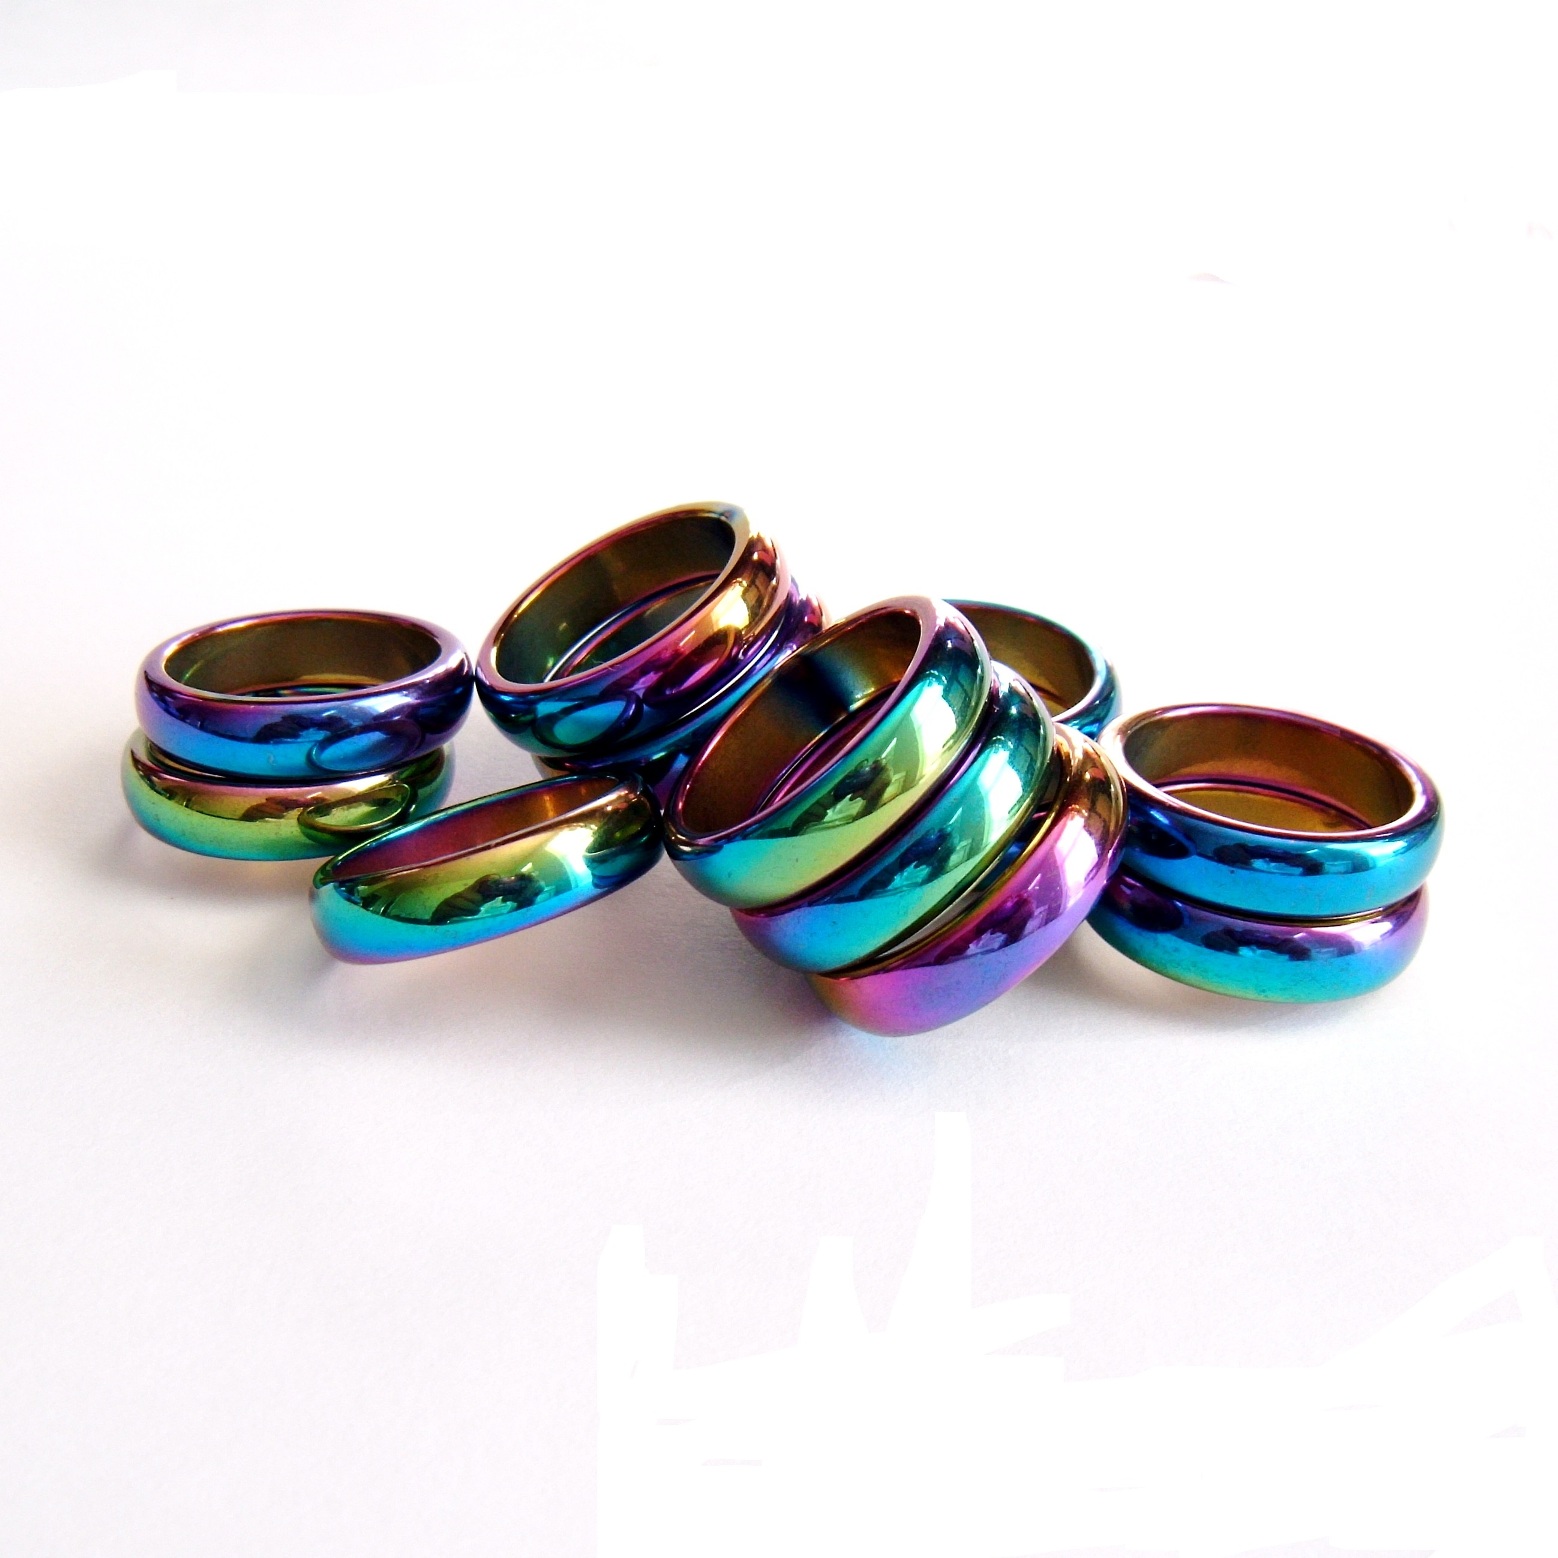 12 PC. MAGNETIC 6mm Dome Rainbow Magnetic Rings